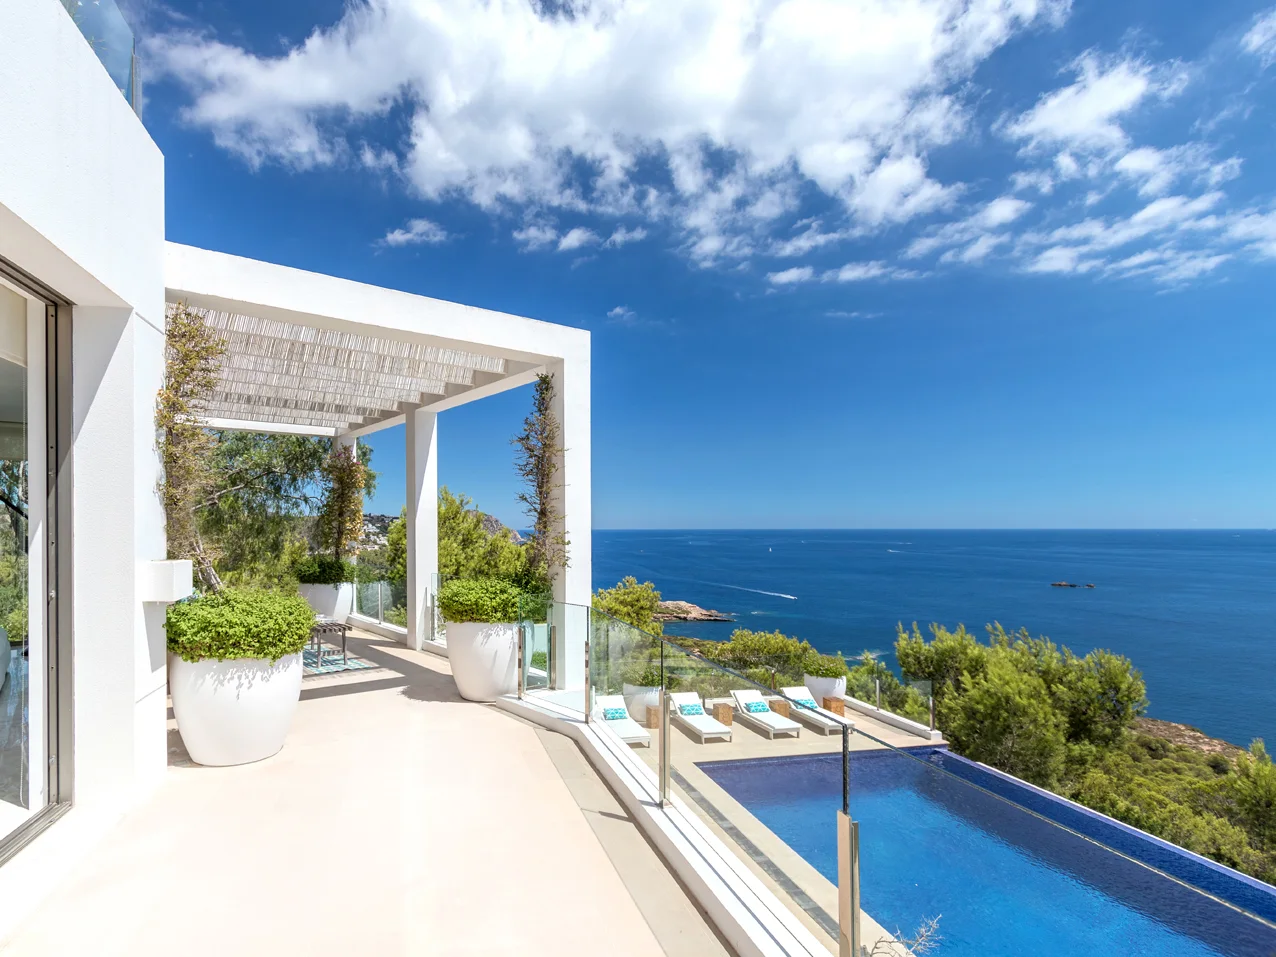 Villa with panoramic views and rental license